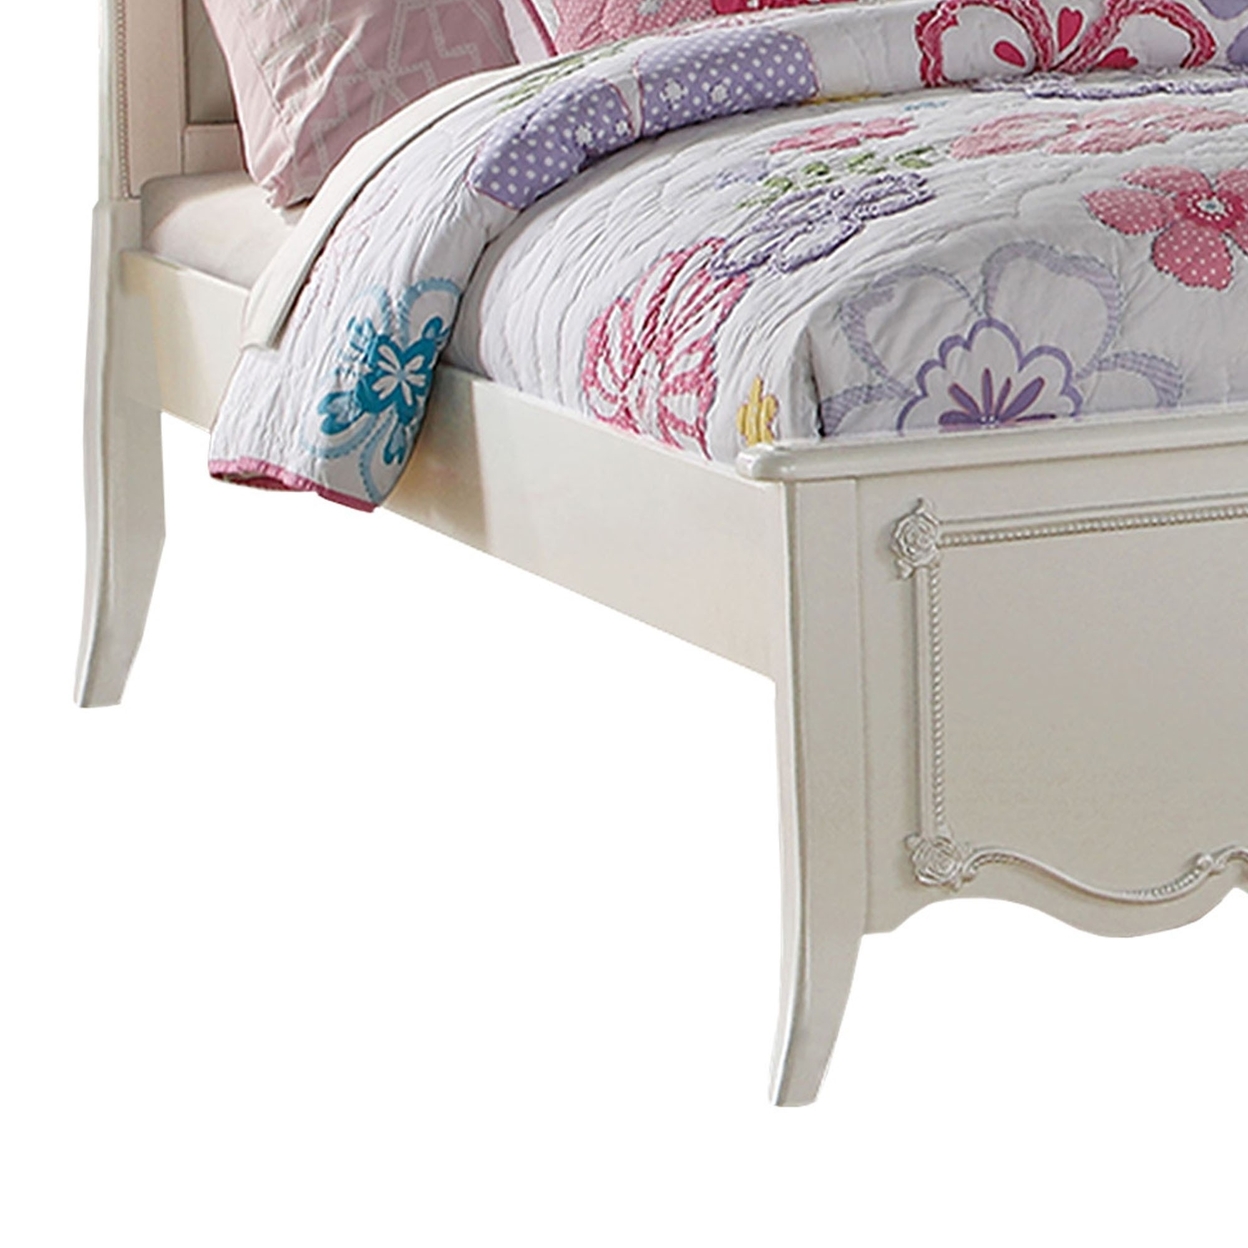 Pine Wood Twin Bed With Button Tufted Headboard, Pearl White- Saltoro Sherpi